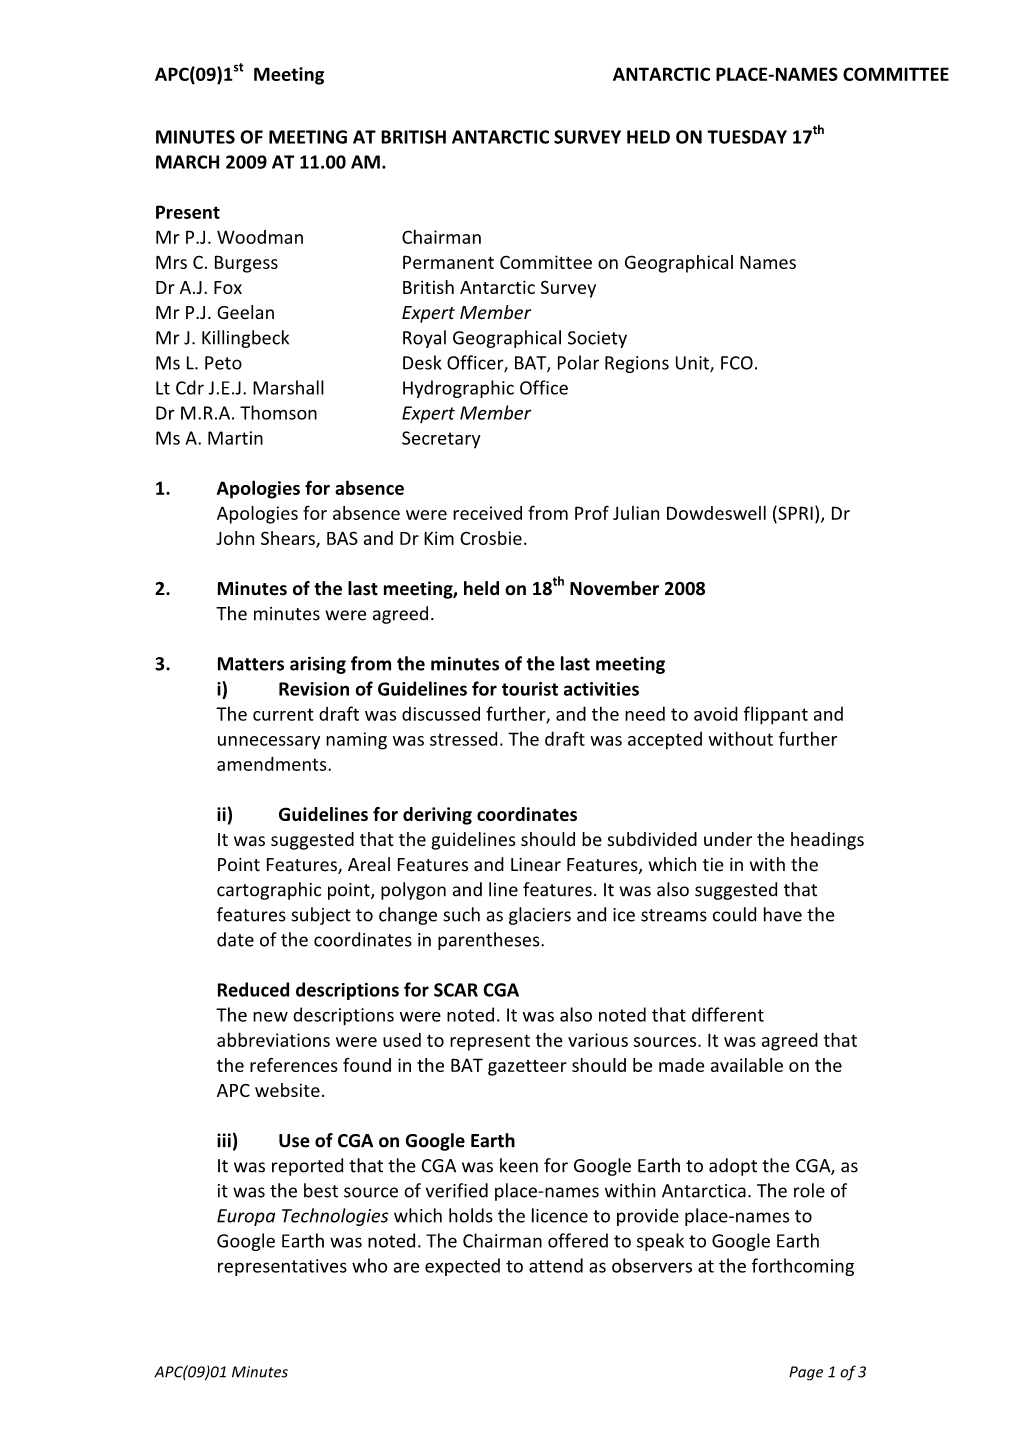 MINUTES of MEETING at BRITISH ANTARCTIC SURVEY HELD on TUESDAY 17Th MARCH 2009 at 11.00 AM